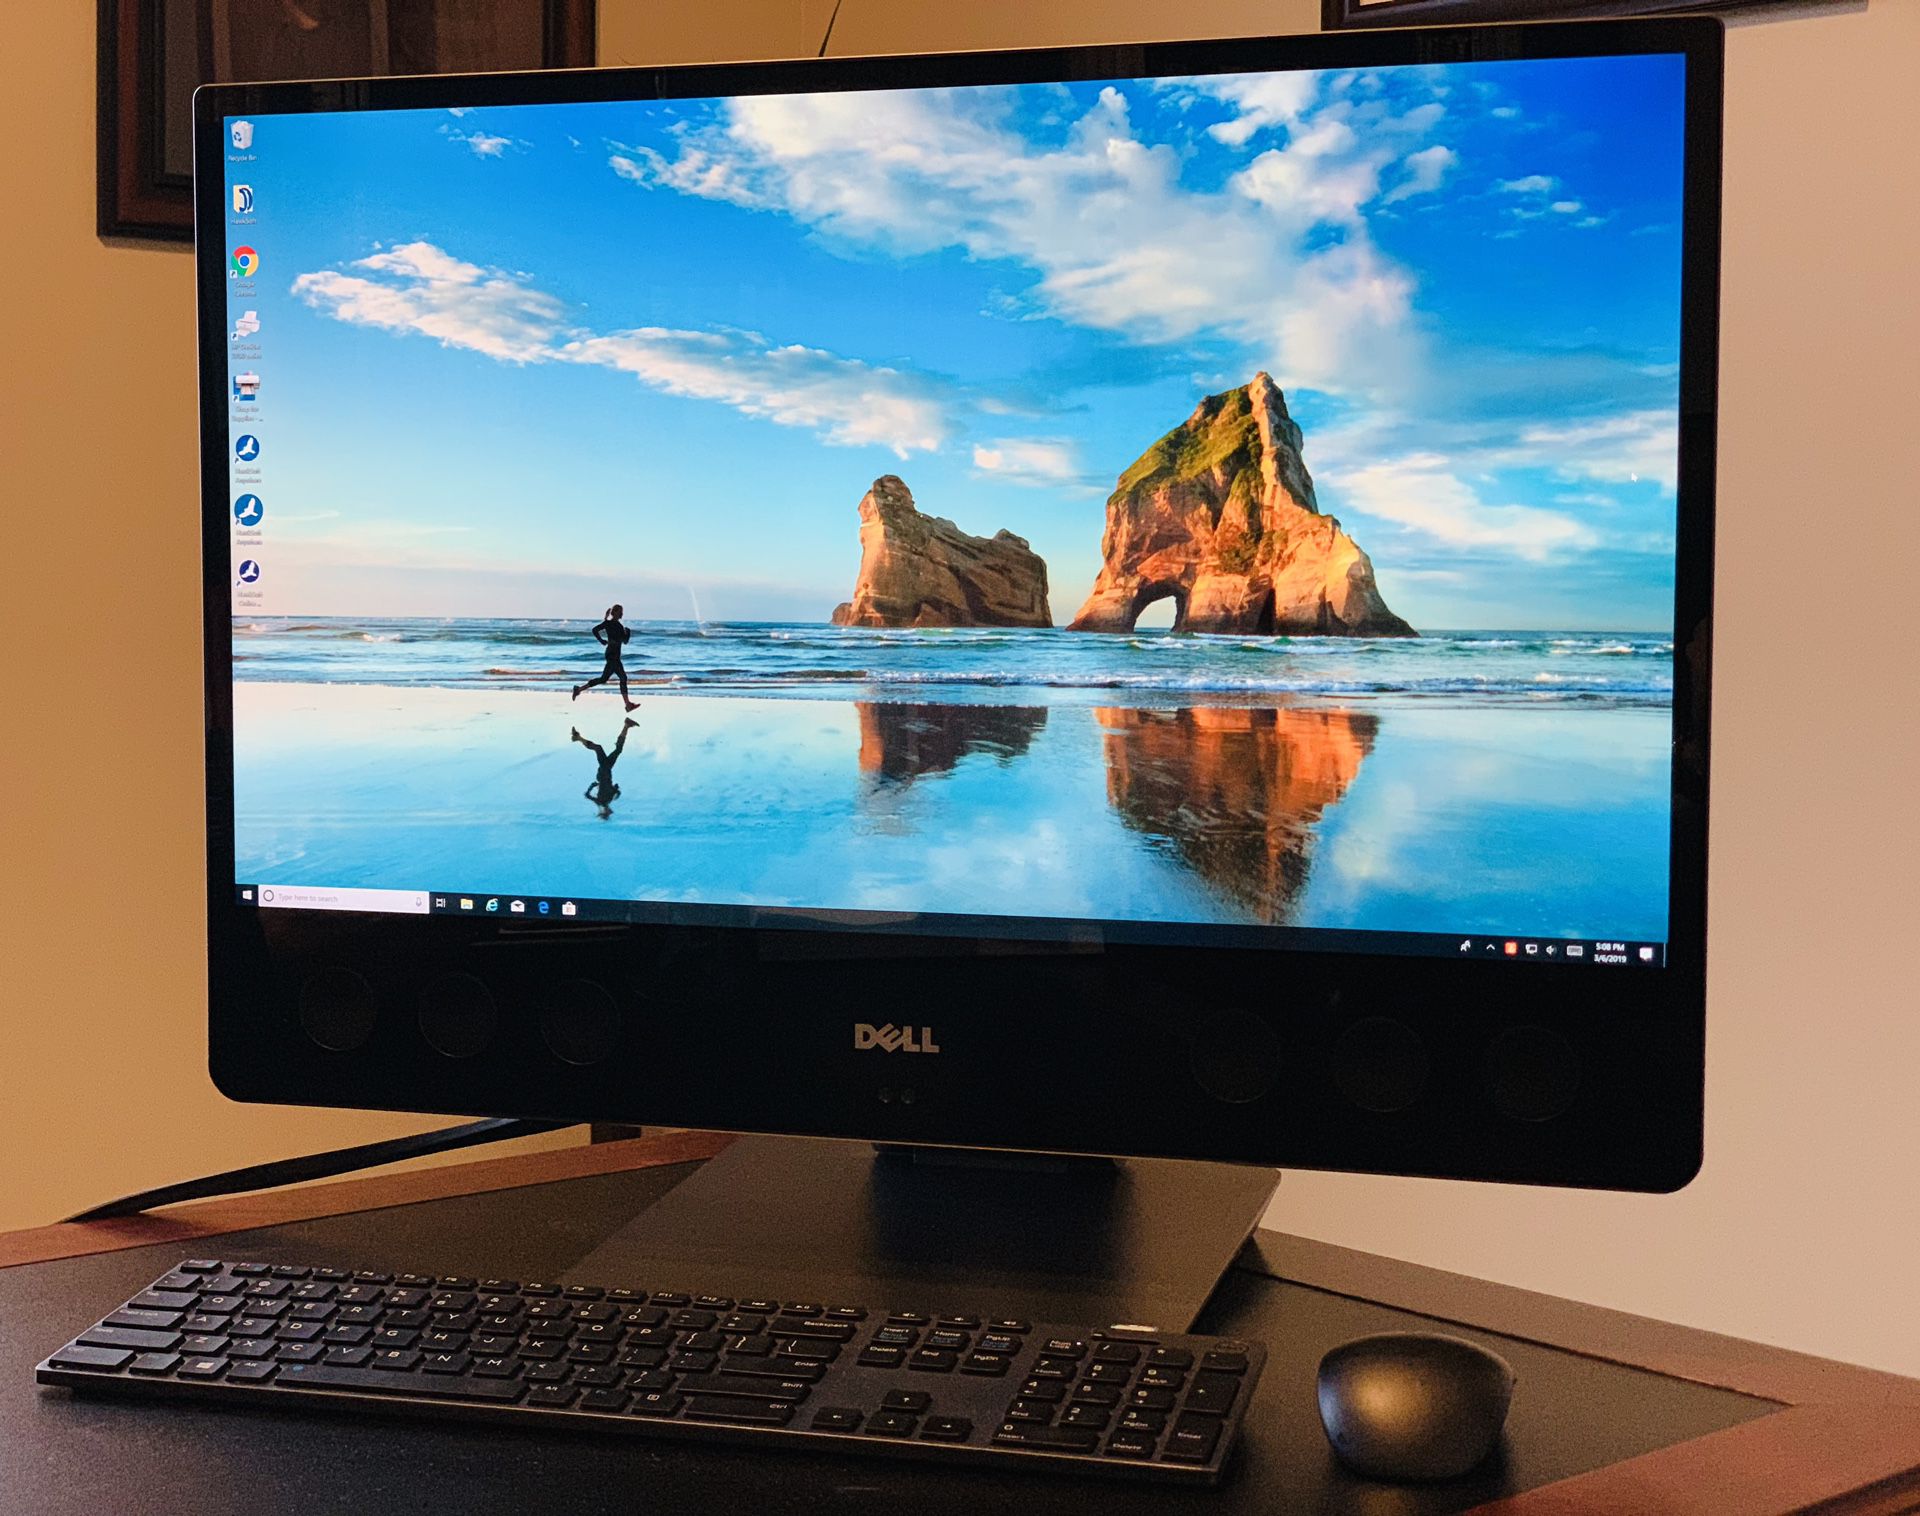 DELL XPS 27 ALL-IN-ONE DESKTOP COMPUTER